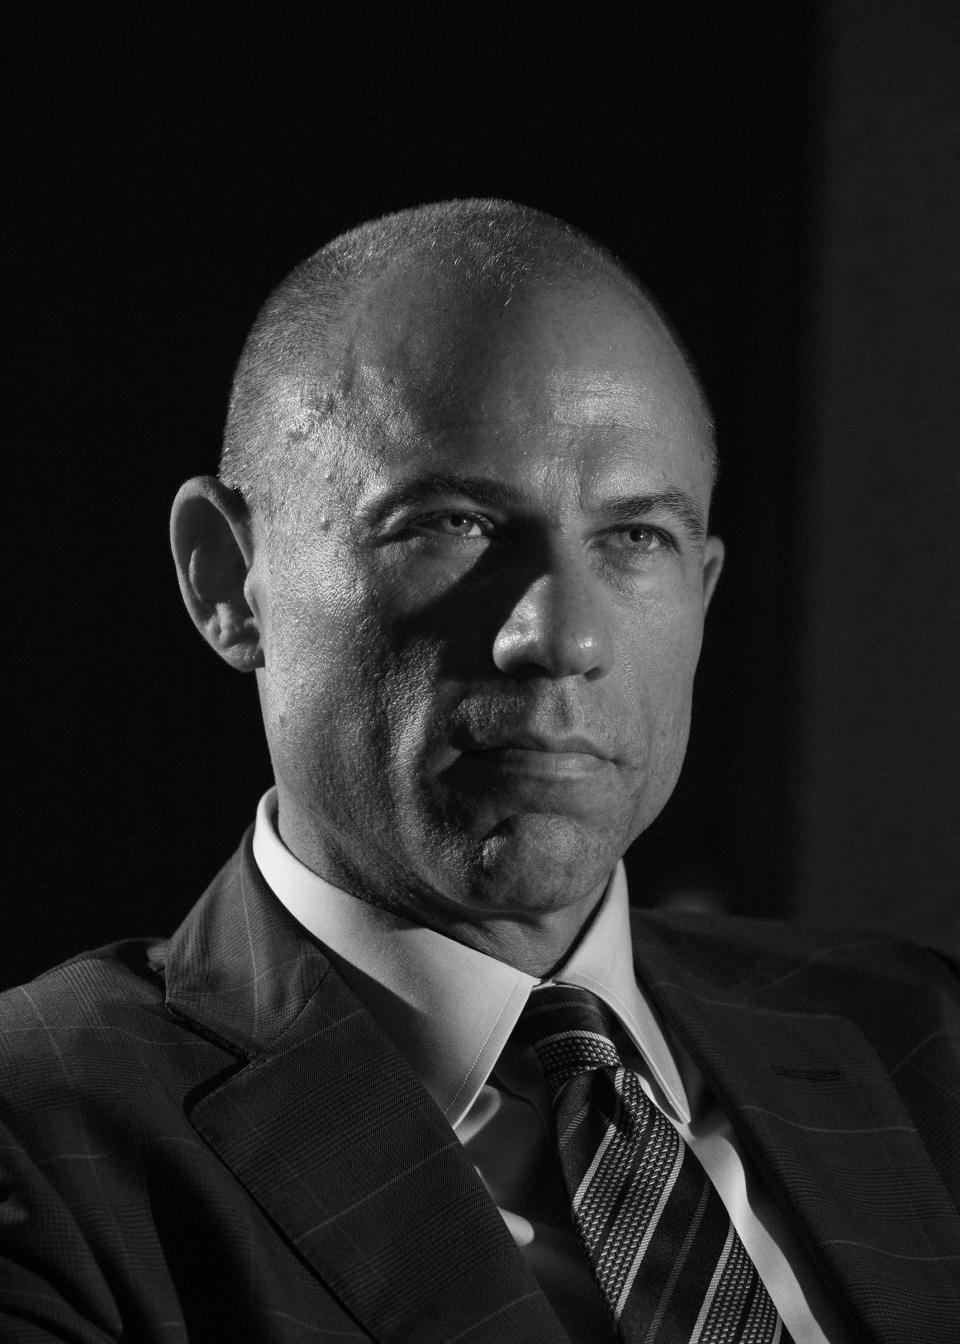 Michael Avenatti believes the only way to beat a bully is to be one